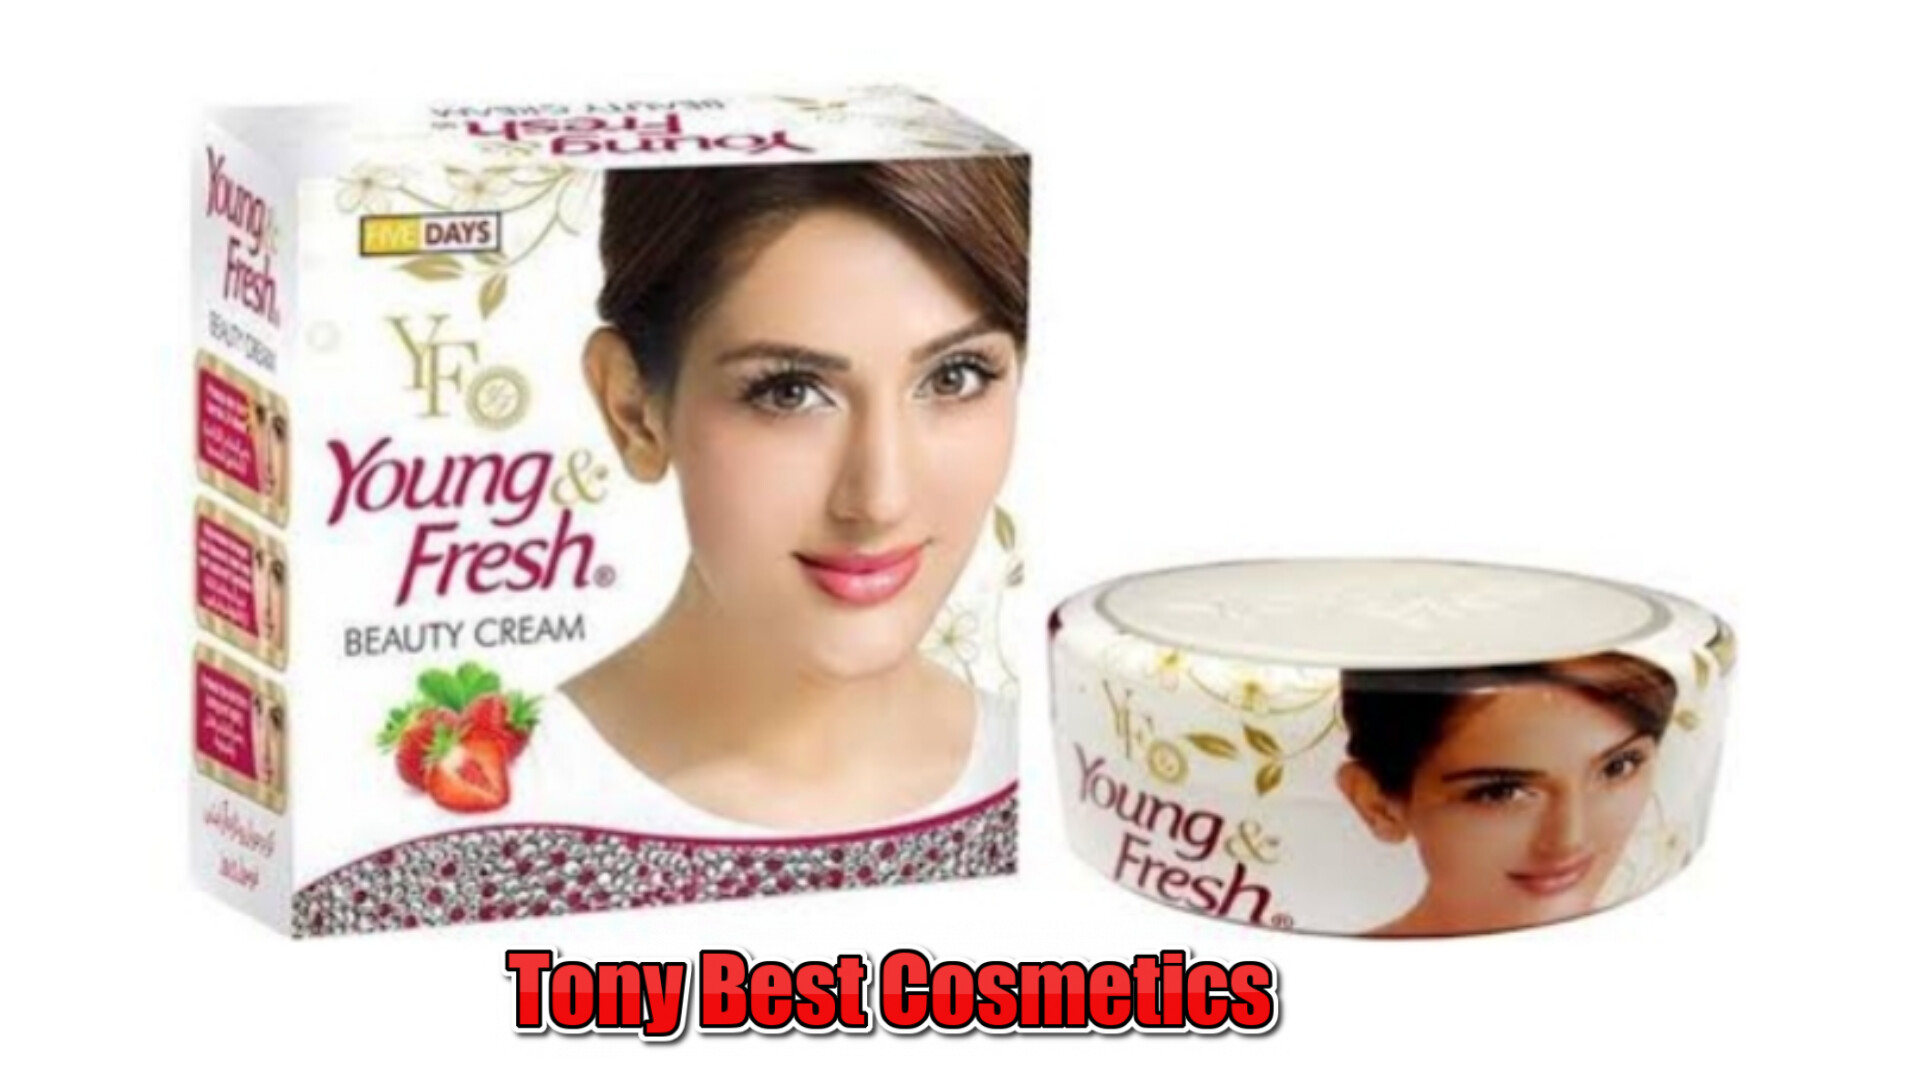 Young and fresh beauty cream